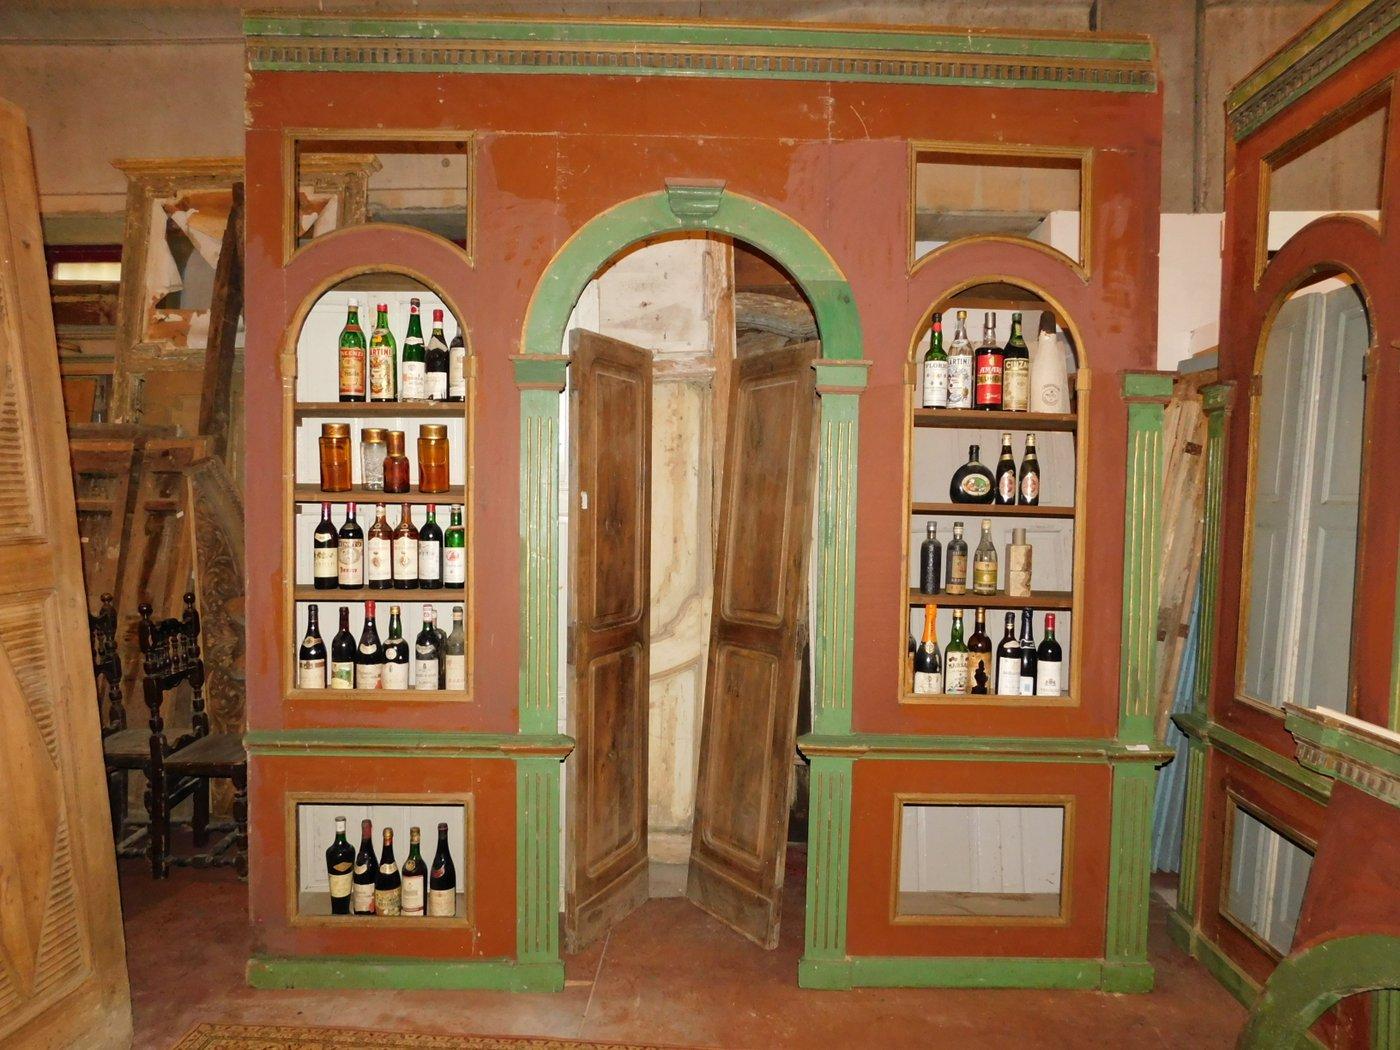 Italian Antique Wine Cellar Furniture, in Two Wall Bodies, Red/Green Wood, Library, 1800